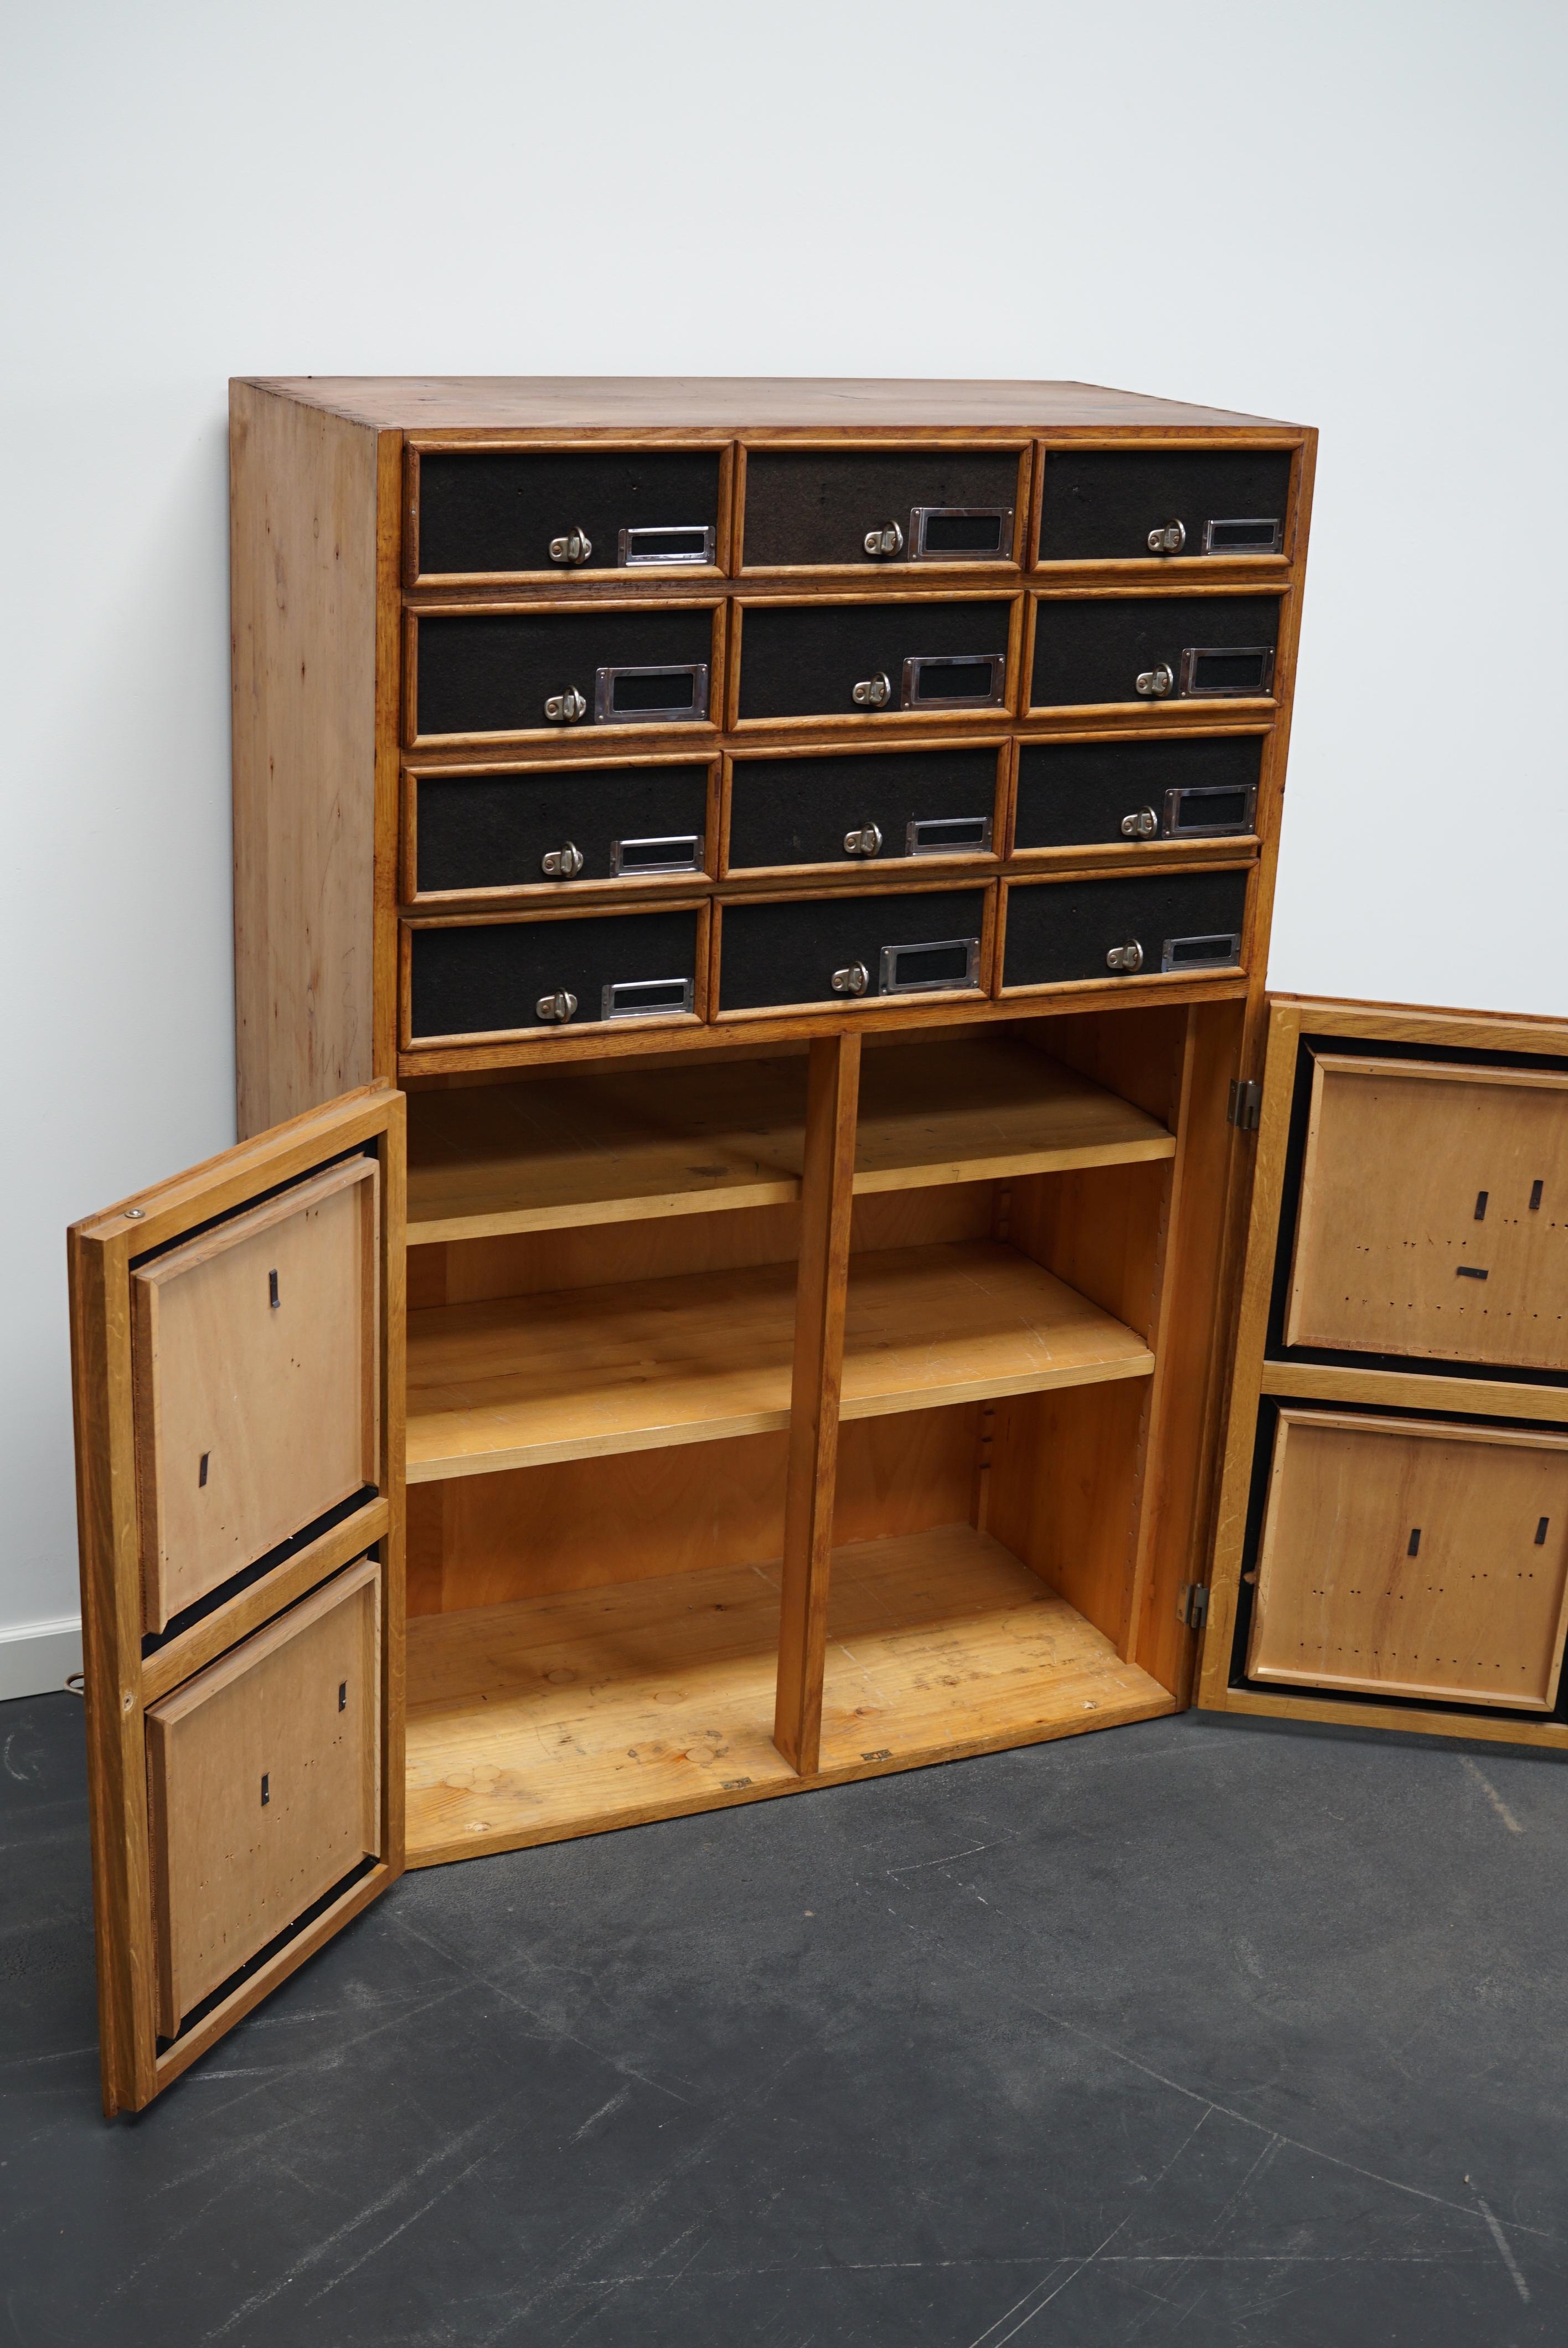 German Industrial Oak and Pine Apothecary Cabinet, Mid-20th Century For Sale 11